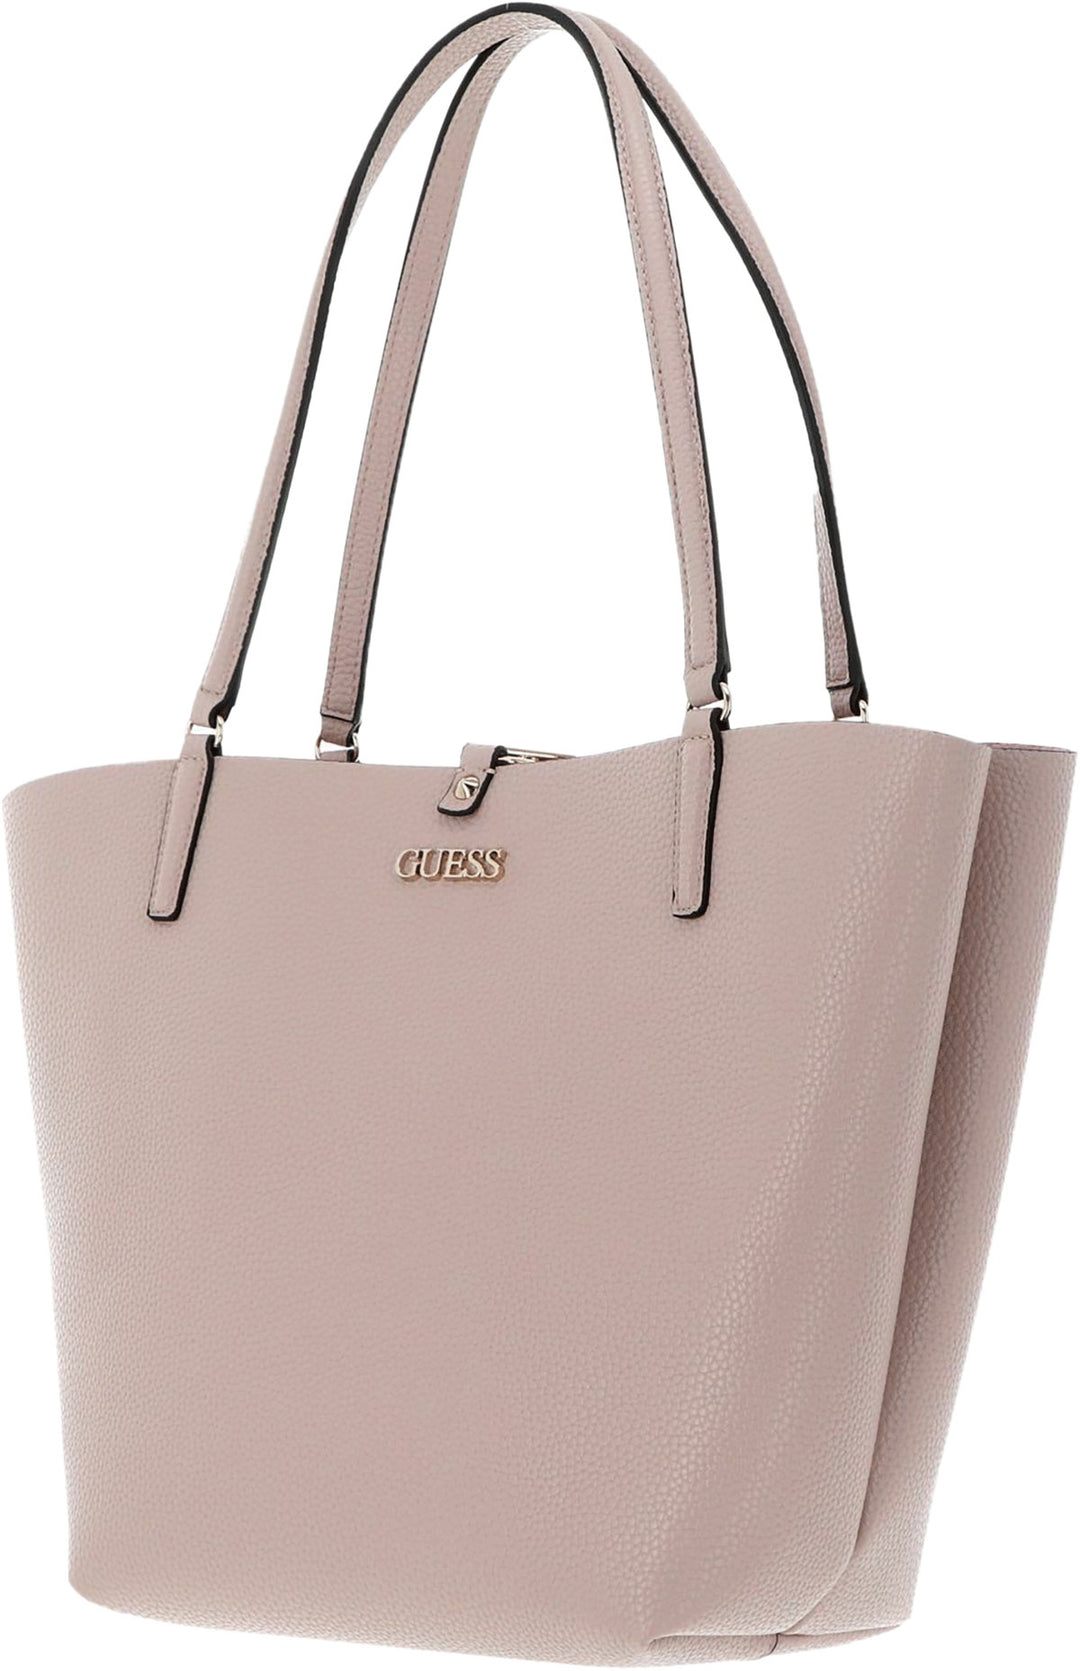 Guess Alby Toggle Frauen Synthetik Tasche Mit Etui Hellrosa